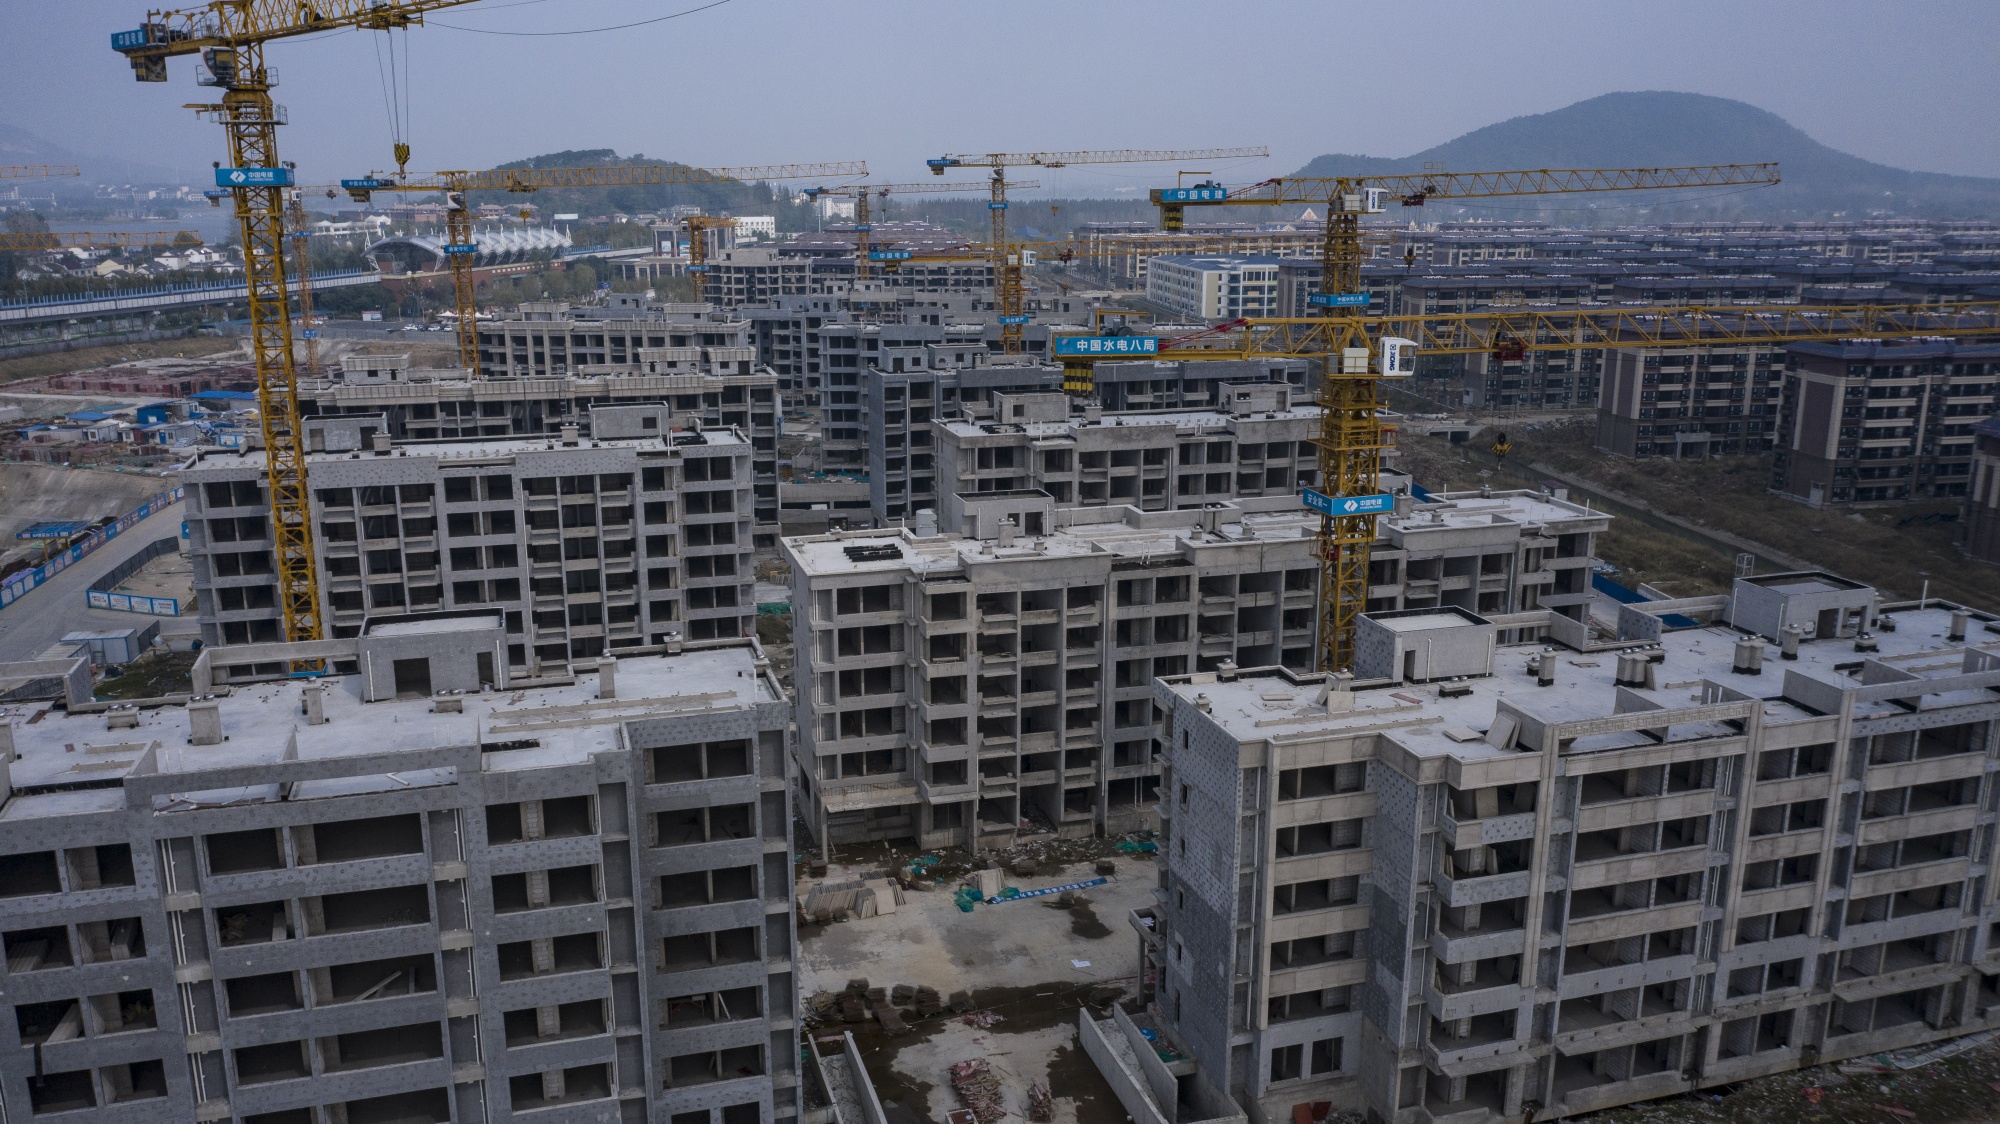 An unfinished China Evergrande Group project near Nanjing, China, in&nbsp;October.